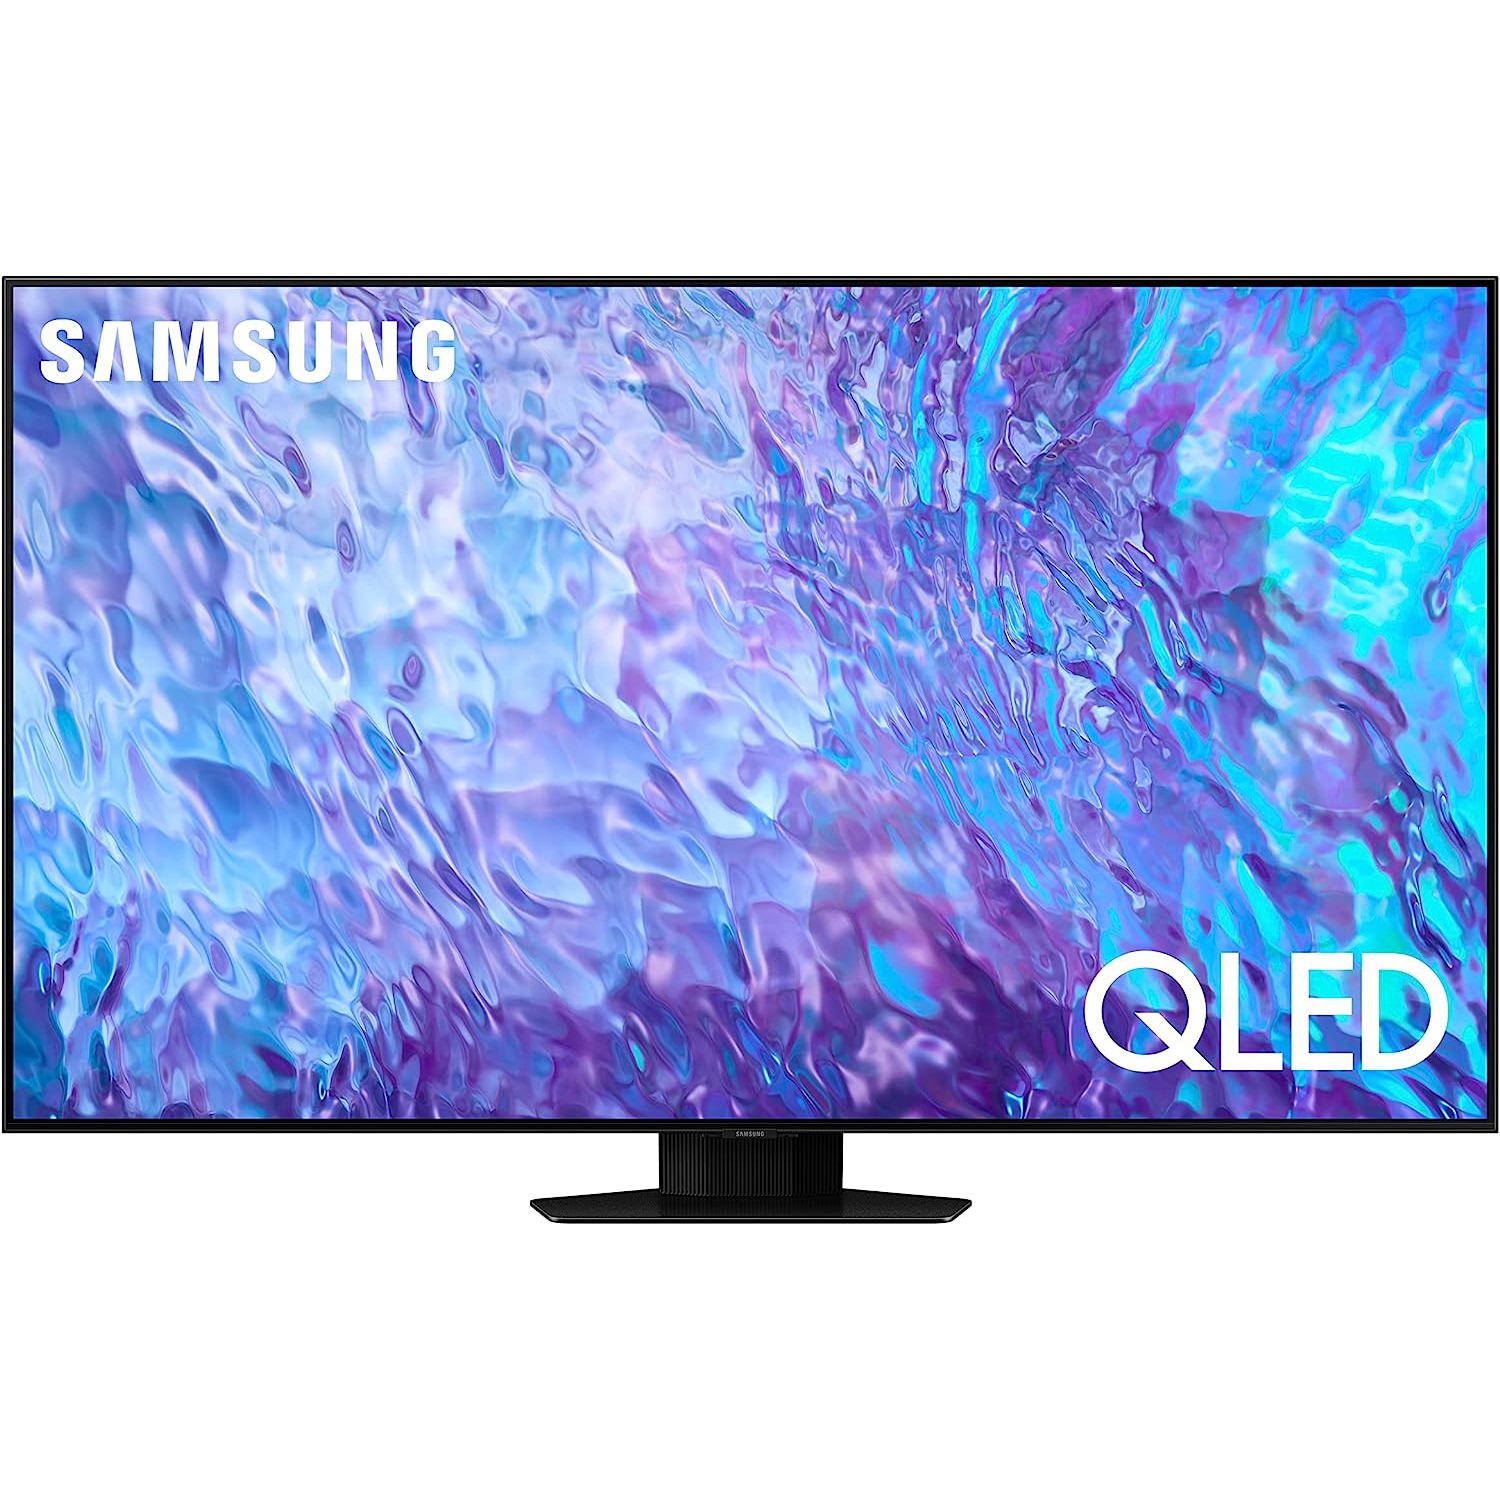 SAMSUNG 75-Inch Class QLED 4K Q80C Series Quantum HDR+, Dolby Atmos Object Tracking Sound Lite, Q-Symphony 3.0, Gaming Hub, Smart TV with Alexa Built-in - Open Box (10/10)